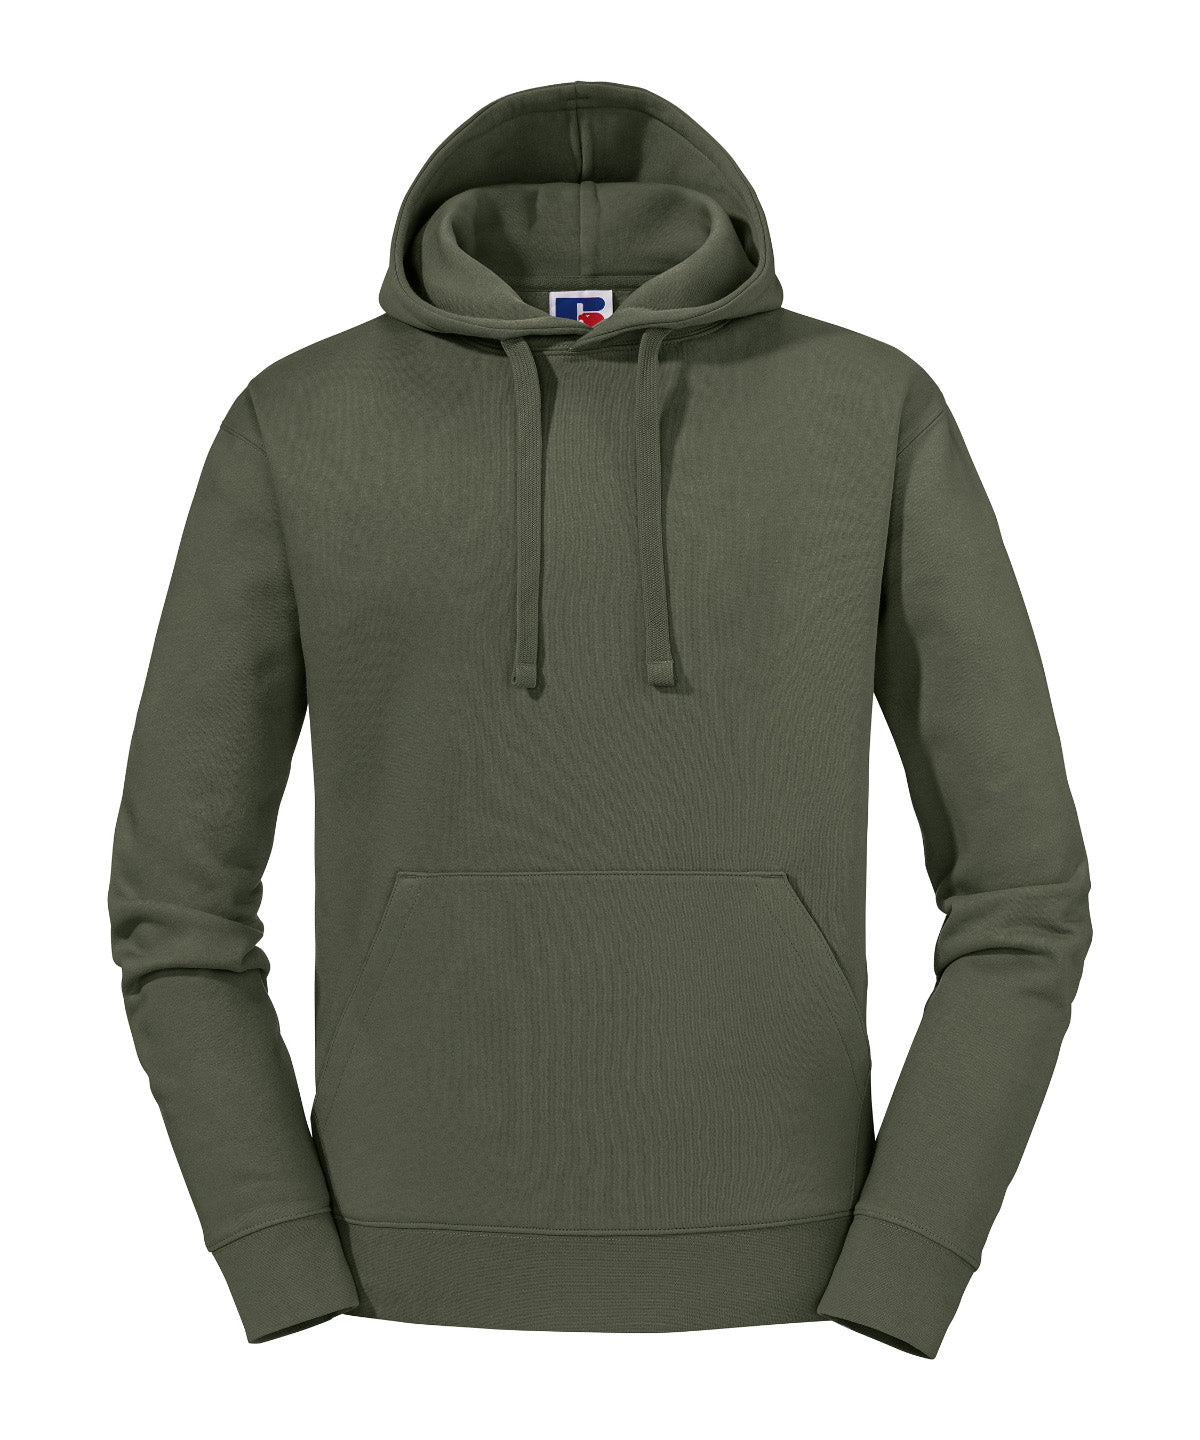 Russell Authentic Hooded Sweatshirt Olive